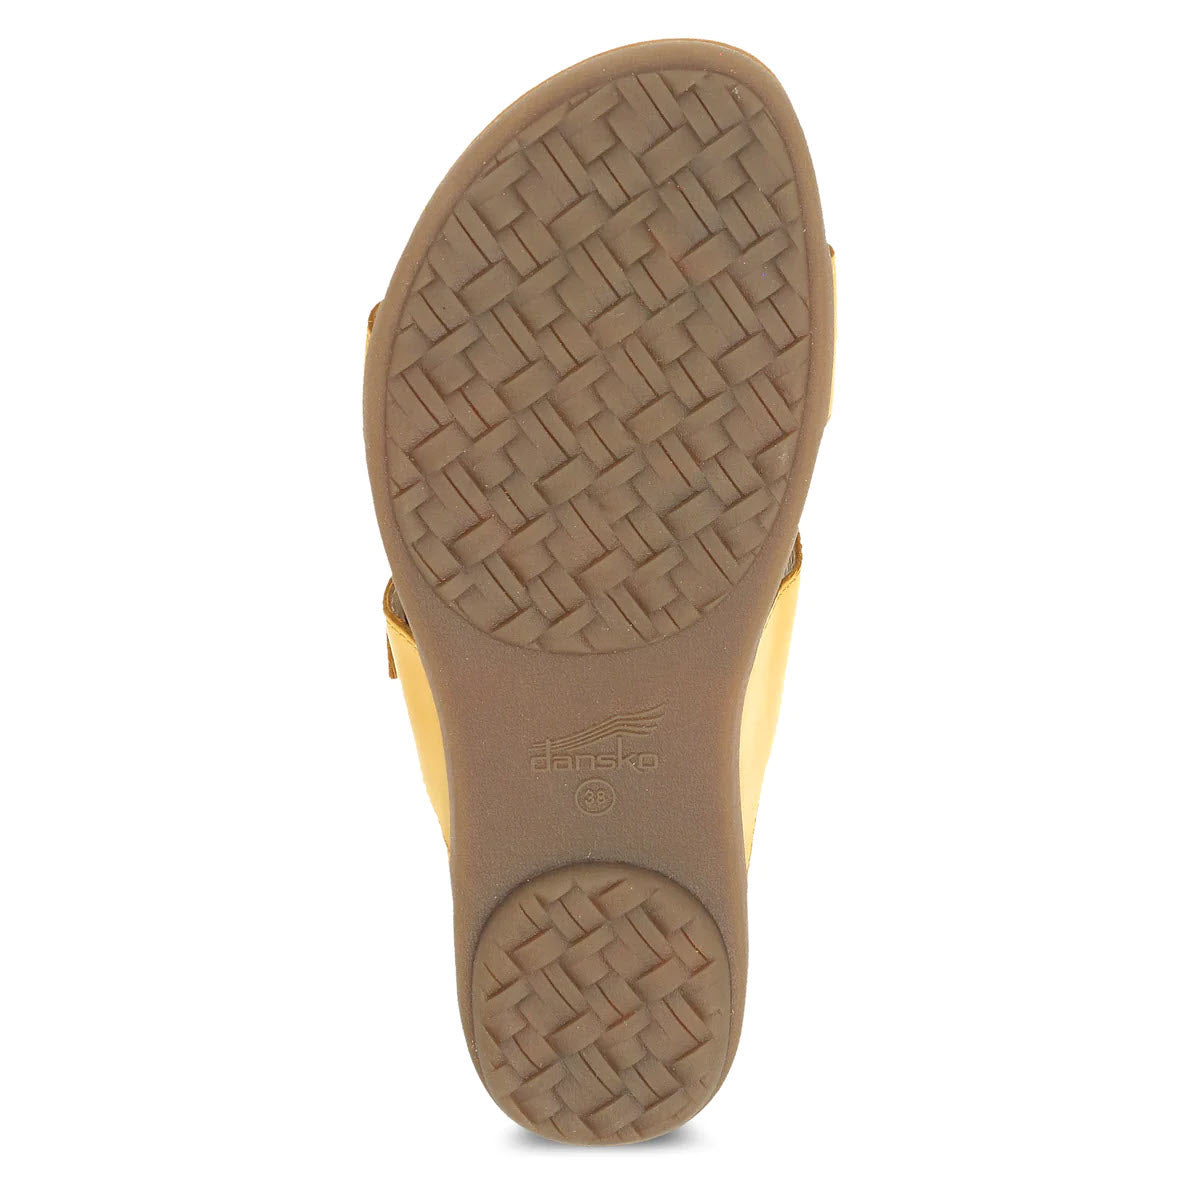 Sole of a shoe showing a woven pattern and the Dansko logo embossed near the center, perfect for casual all-day wear with the Dansko Justine Yellow - Womens.